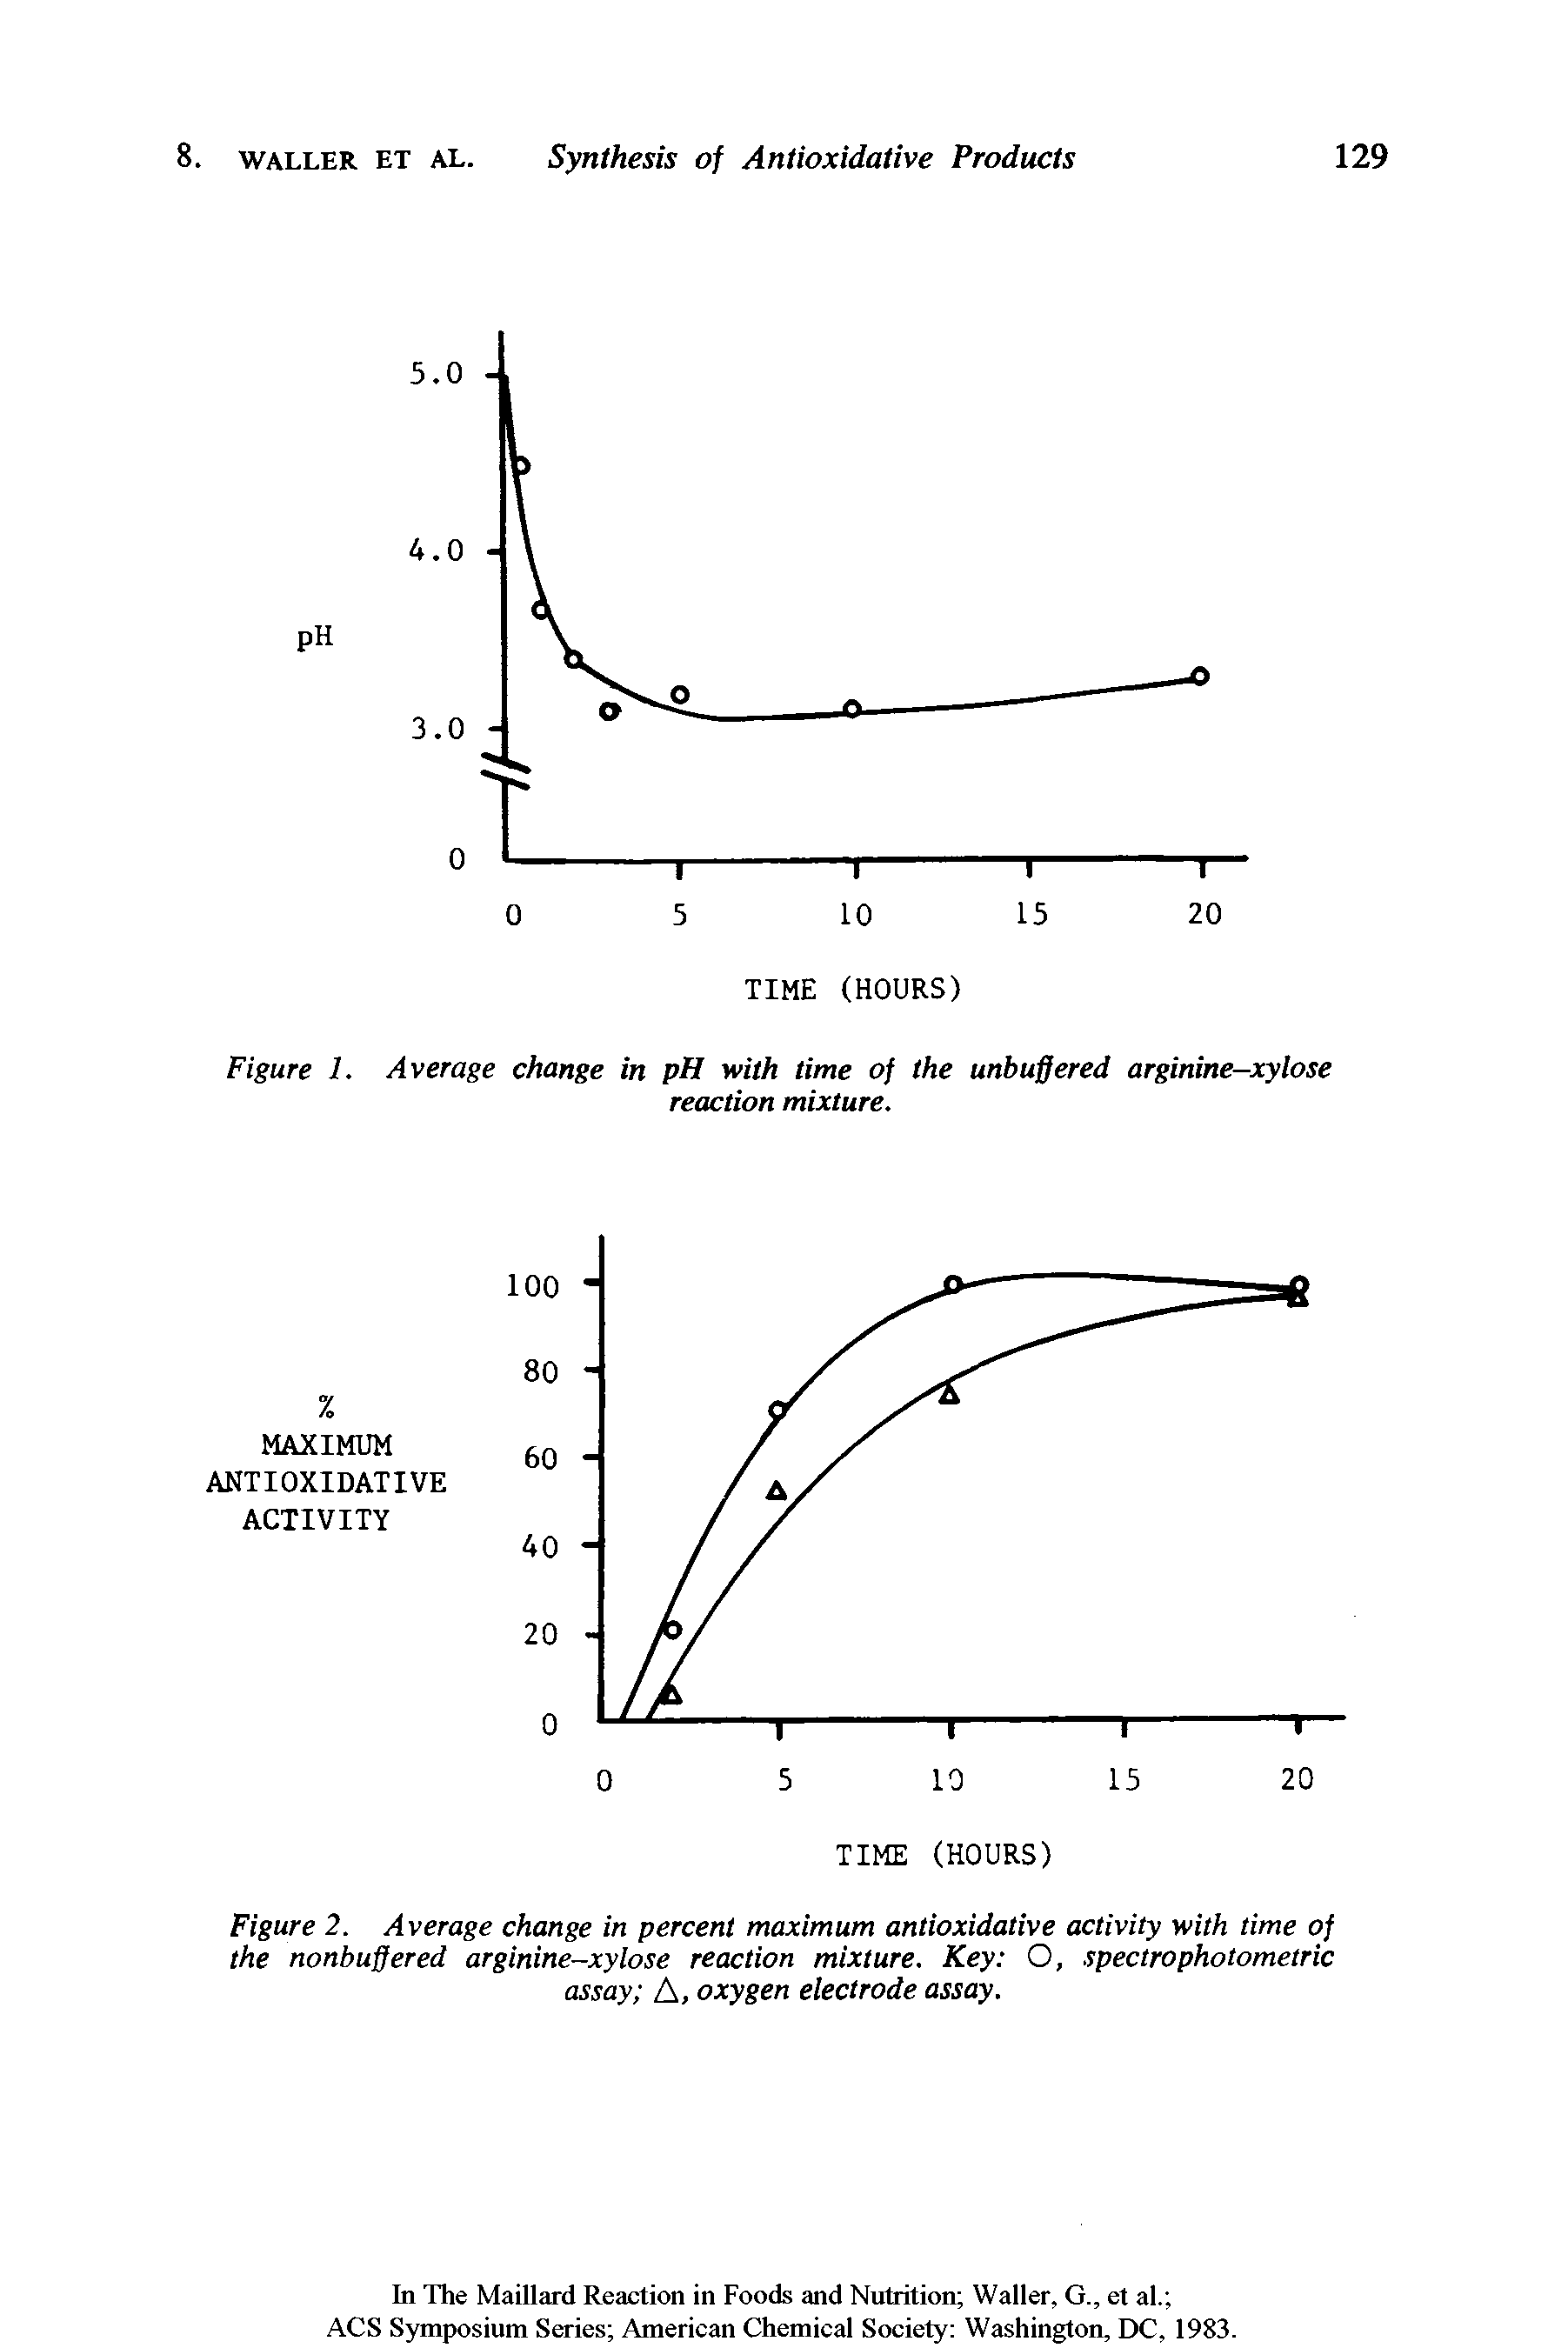 Figure 2. Average change in percent maximum antioxidative activity with time of the nonbuffered arginine-xylose reaction mixture. Key O, spectrophotometric assay A, oxygen electrode assay.